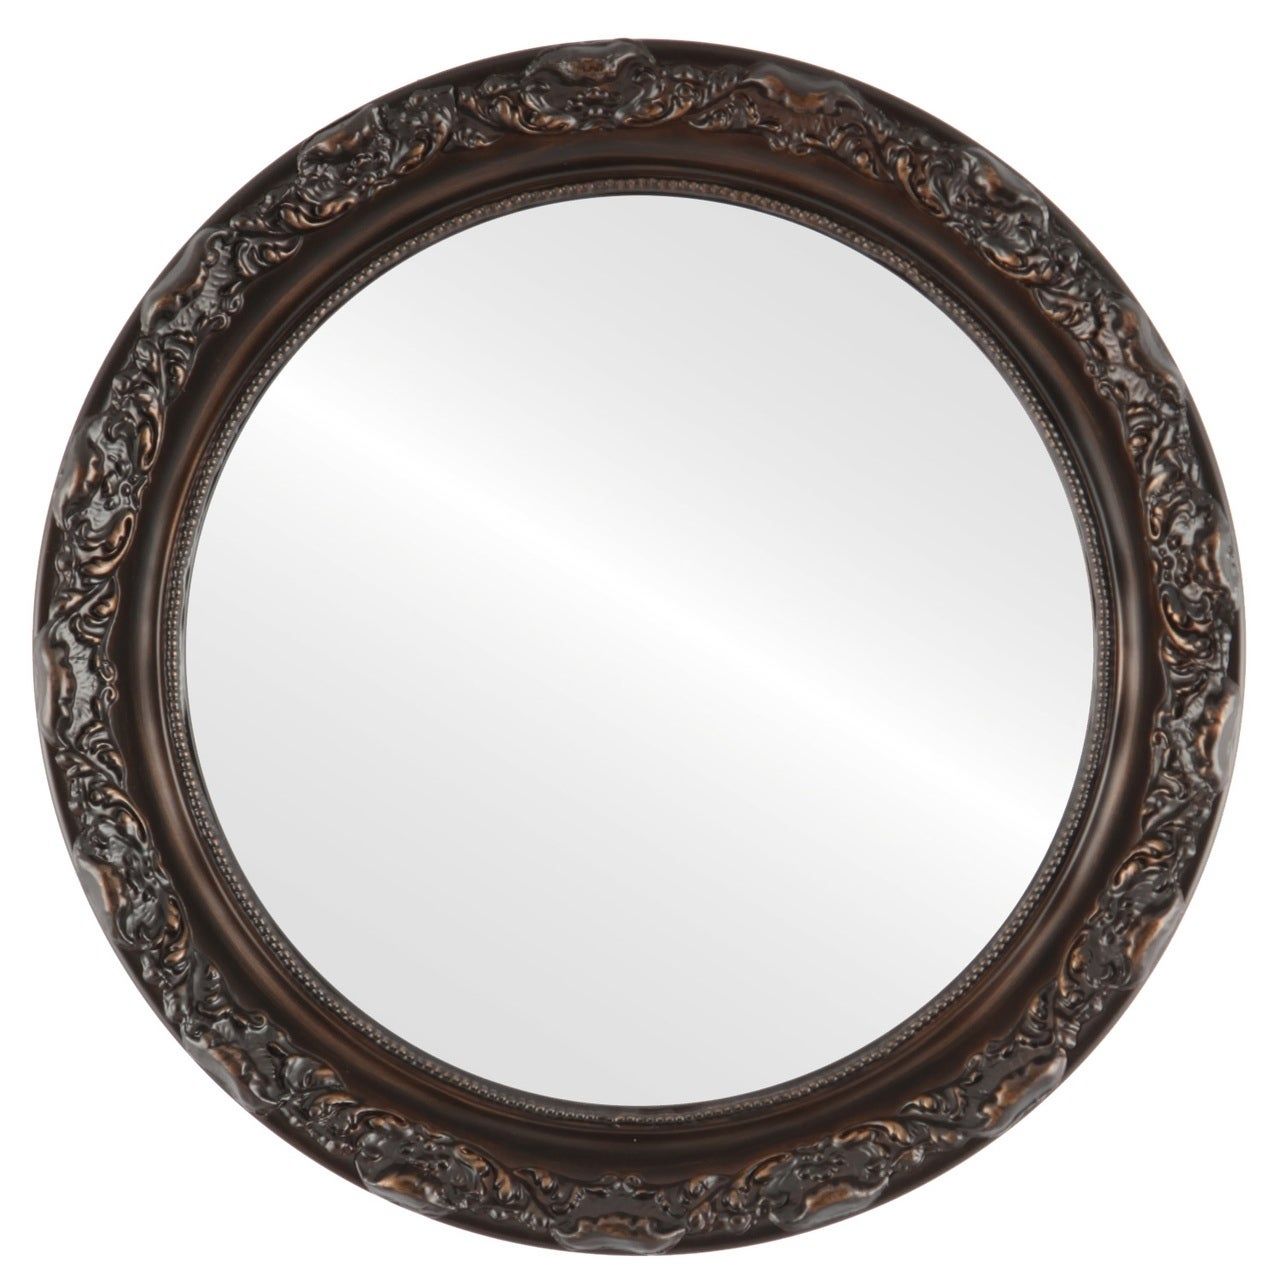 Rome Framed Round Mirror In Rubbed Bronze – Antique Bronze | Ebay Regarding Round Scalloped Wall Mirrors (View 9 of 15)